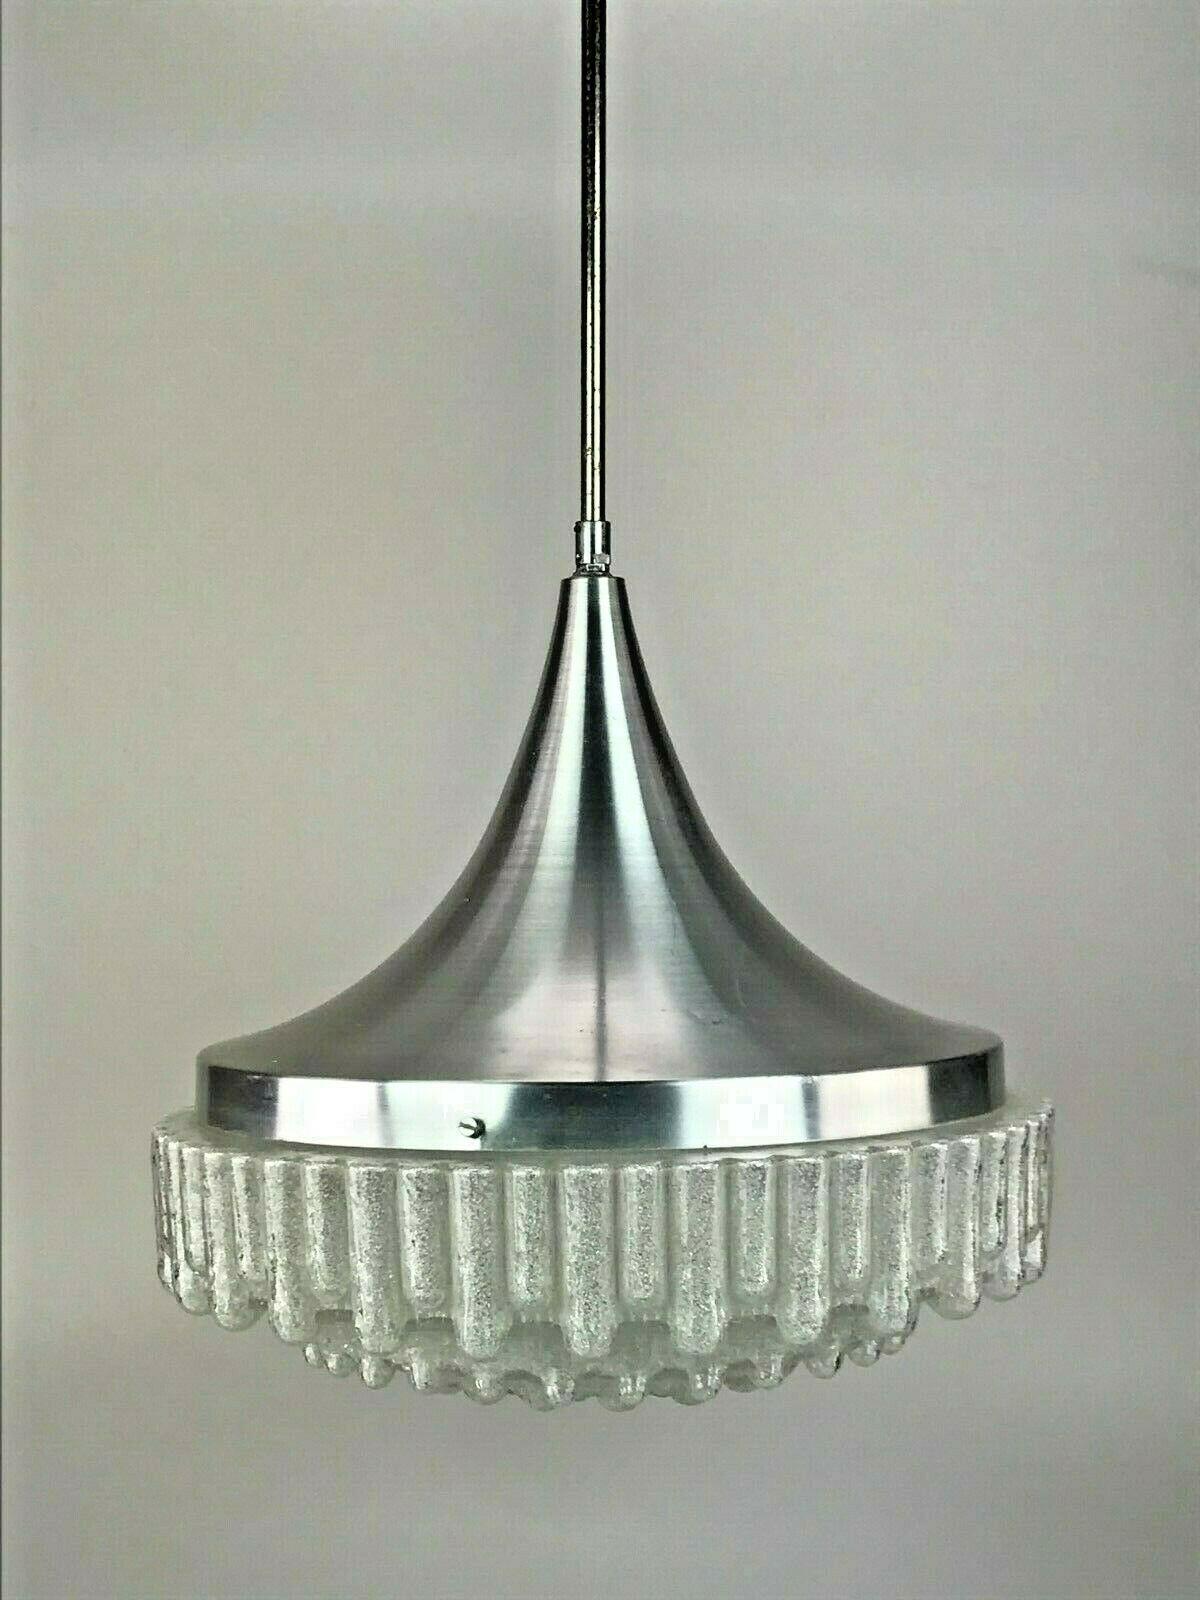 60s 70s lamp hanging lamp ball lamp bubble chrome glass space age design

Object: ceiling lamp

Manufacturer:

Condition: good - vintage

Age: around 1960-1970

Dimensions:

Diameter = 35cm
Height = 83cm

Other notes:

The pictures